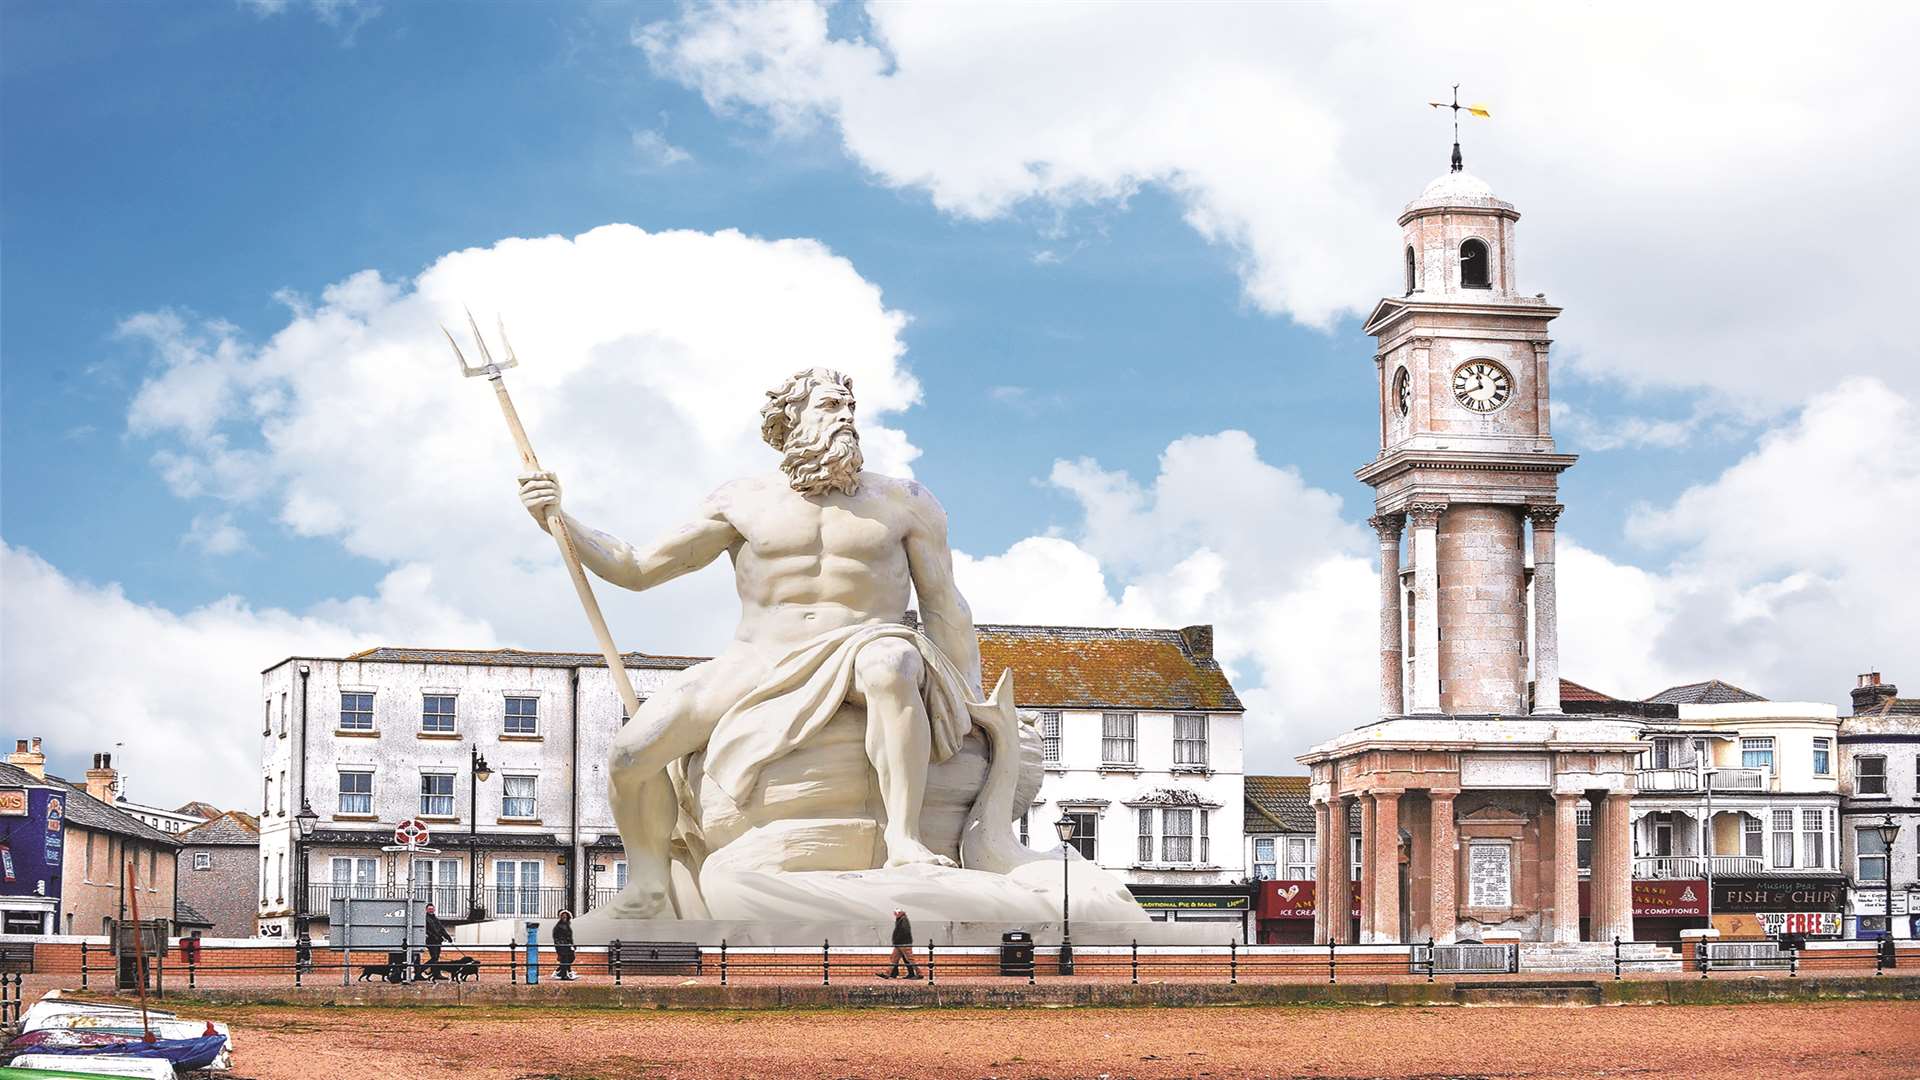 How the seafront could look with a giant statue of Neptune to rival the Clock Tower